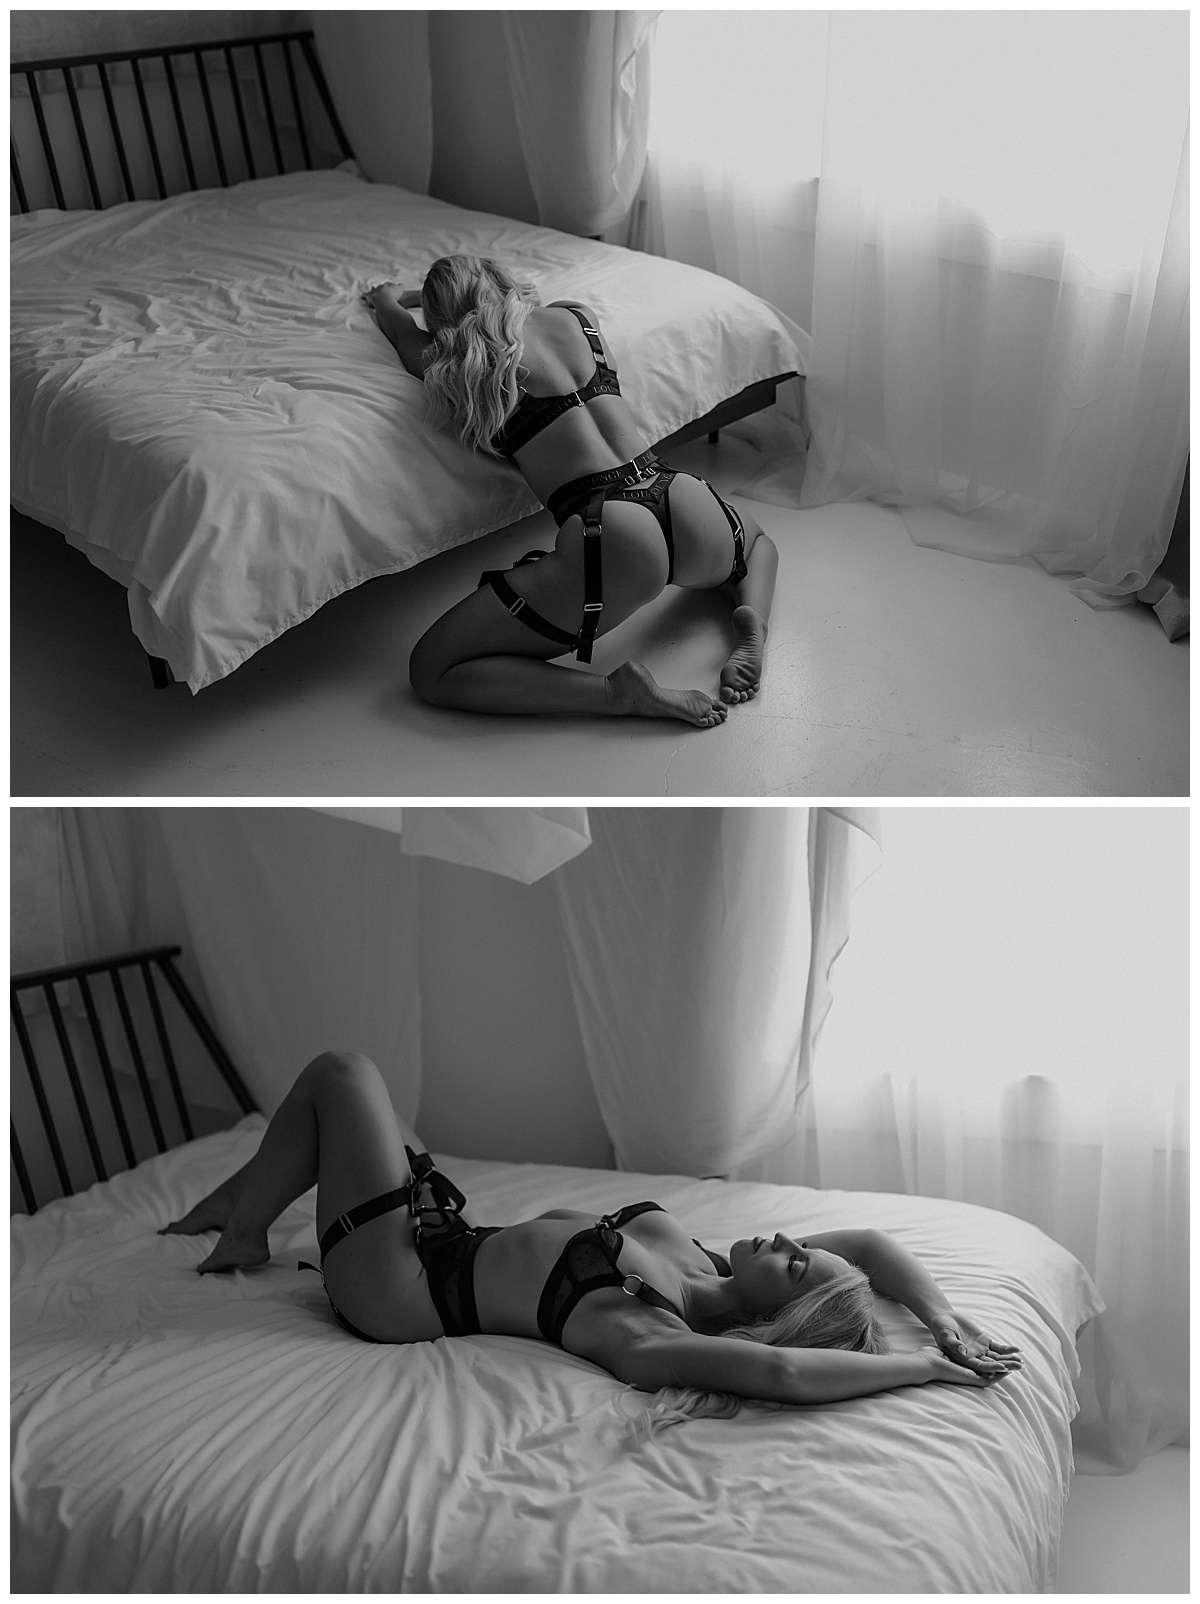 Lady lays on bed and leans into the edge of the bed wearing Strappy Lingerie